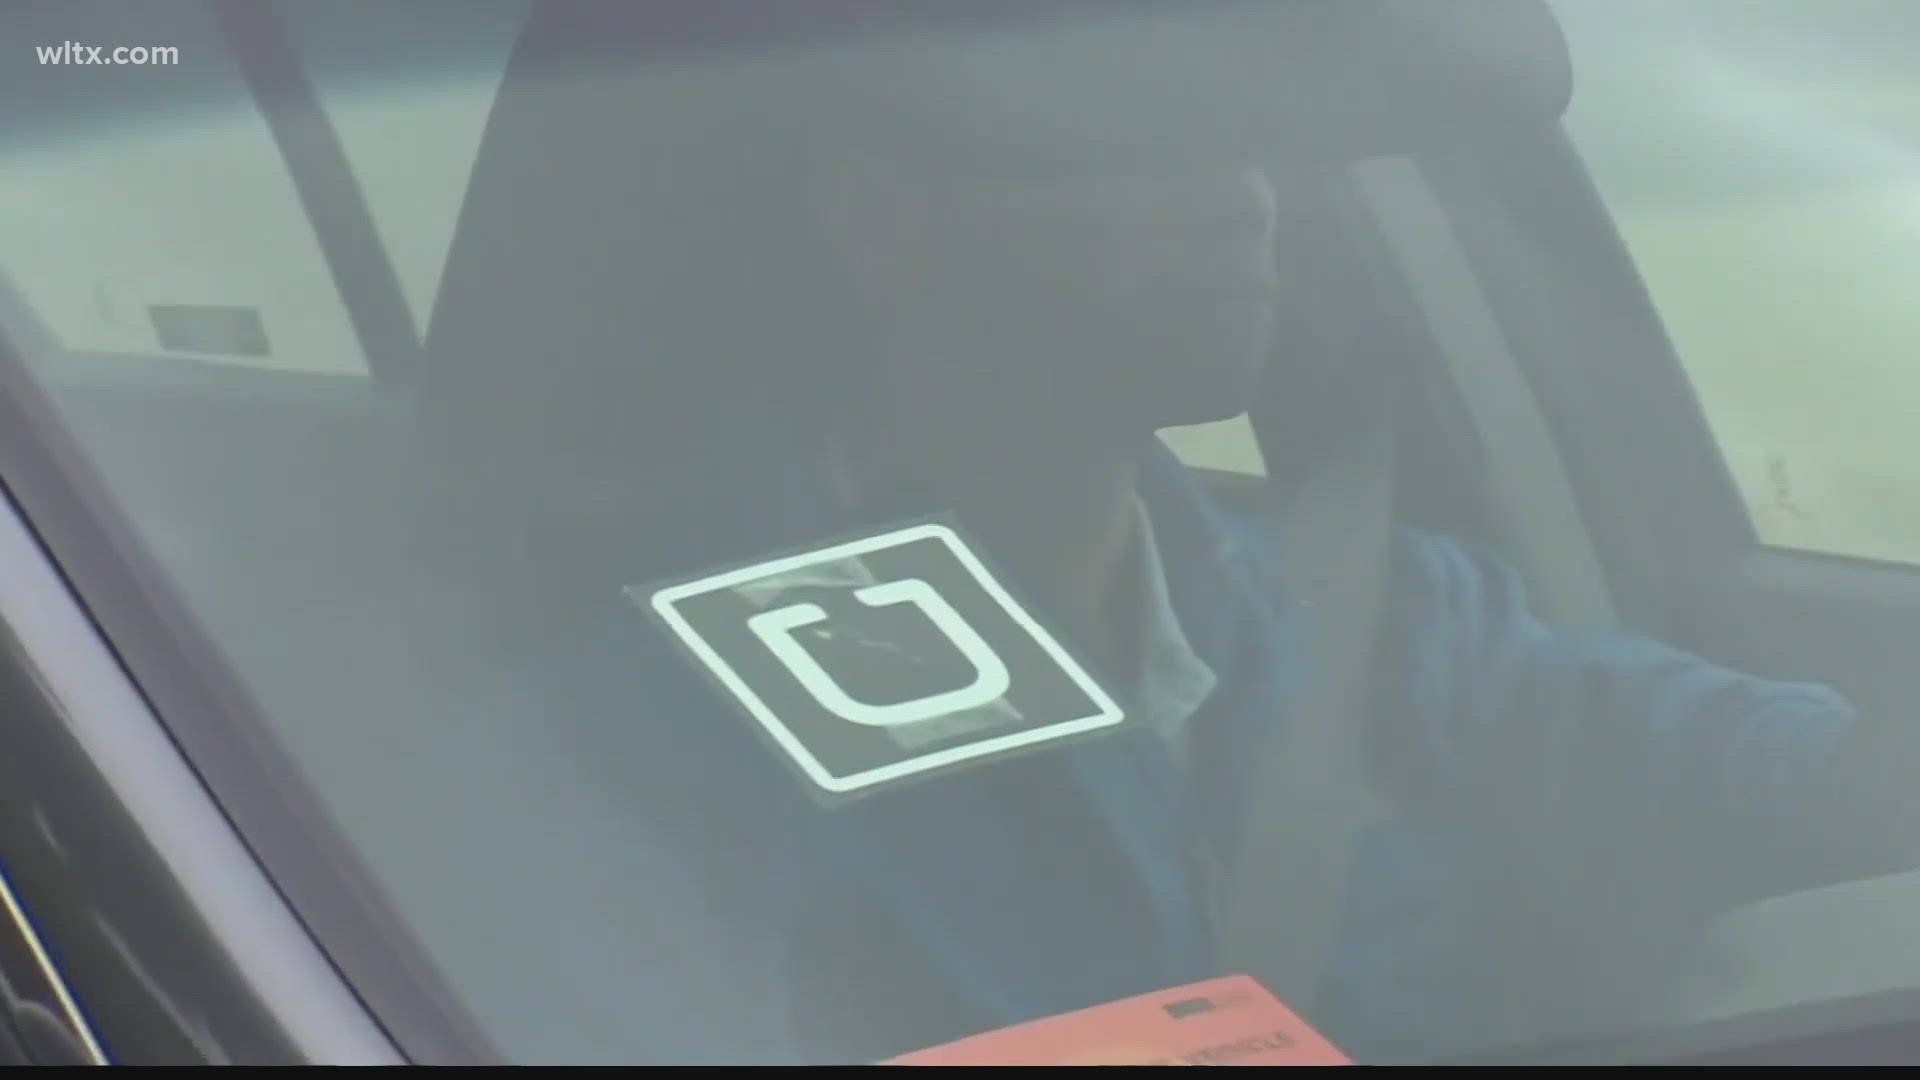 Ride-share company Uber unveiled several changes Wednesday, including an update that will allow teens under the age of 18 to travel by themselves for the first time.